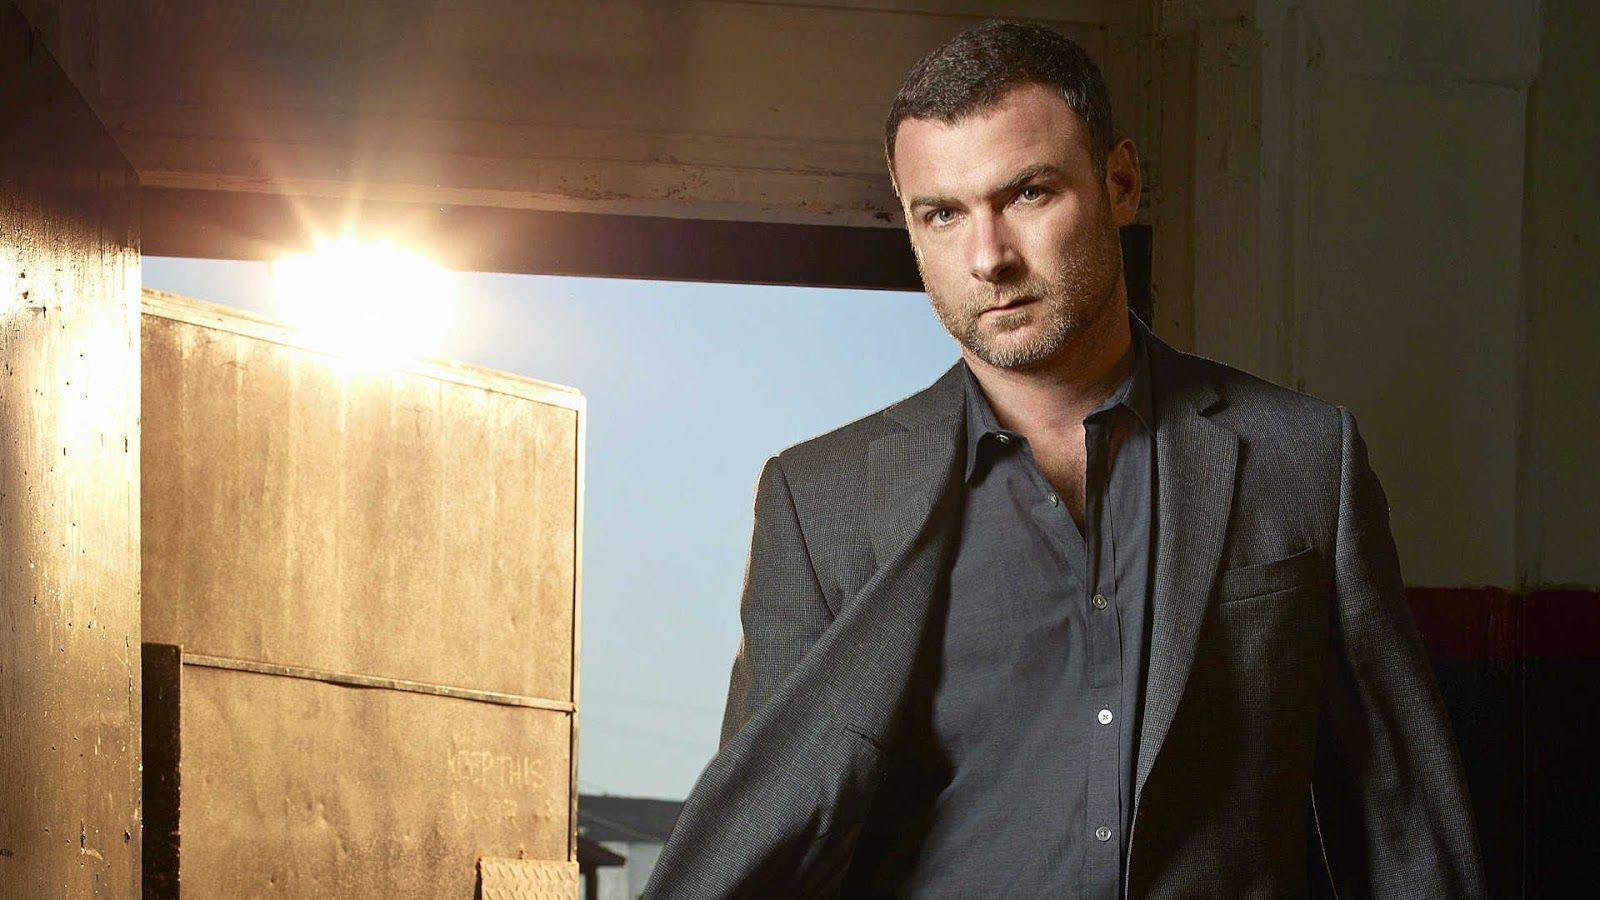 Liev Schreiber All Upcoming Movies List 2017 With Release